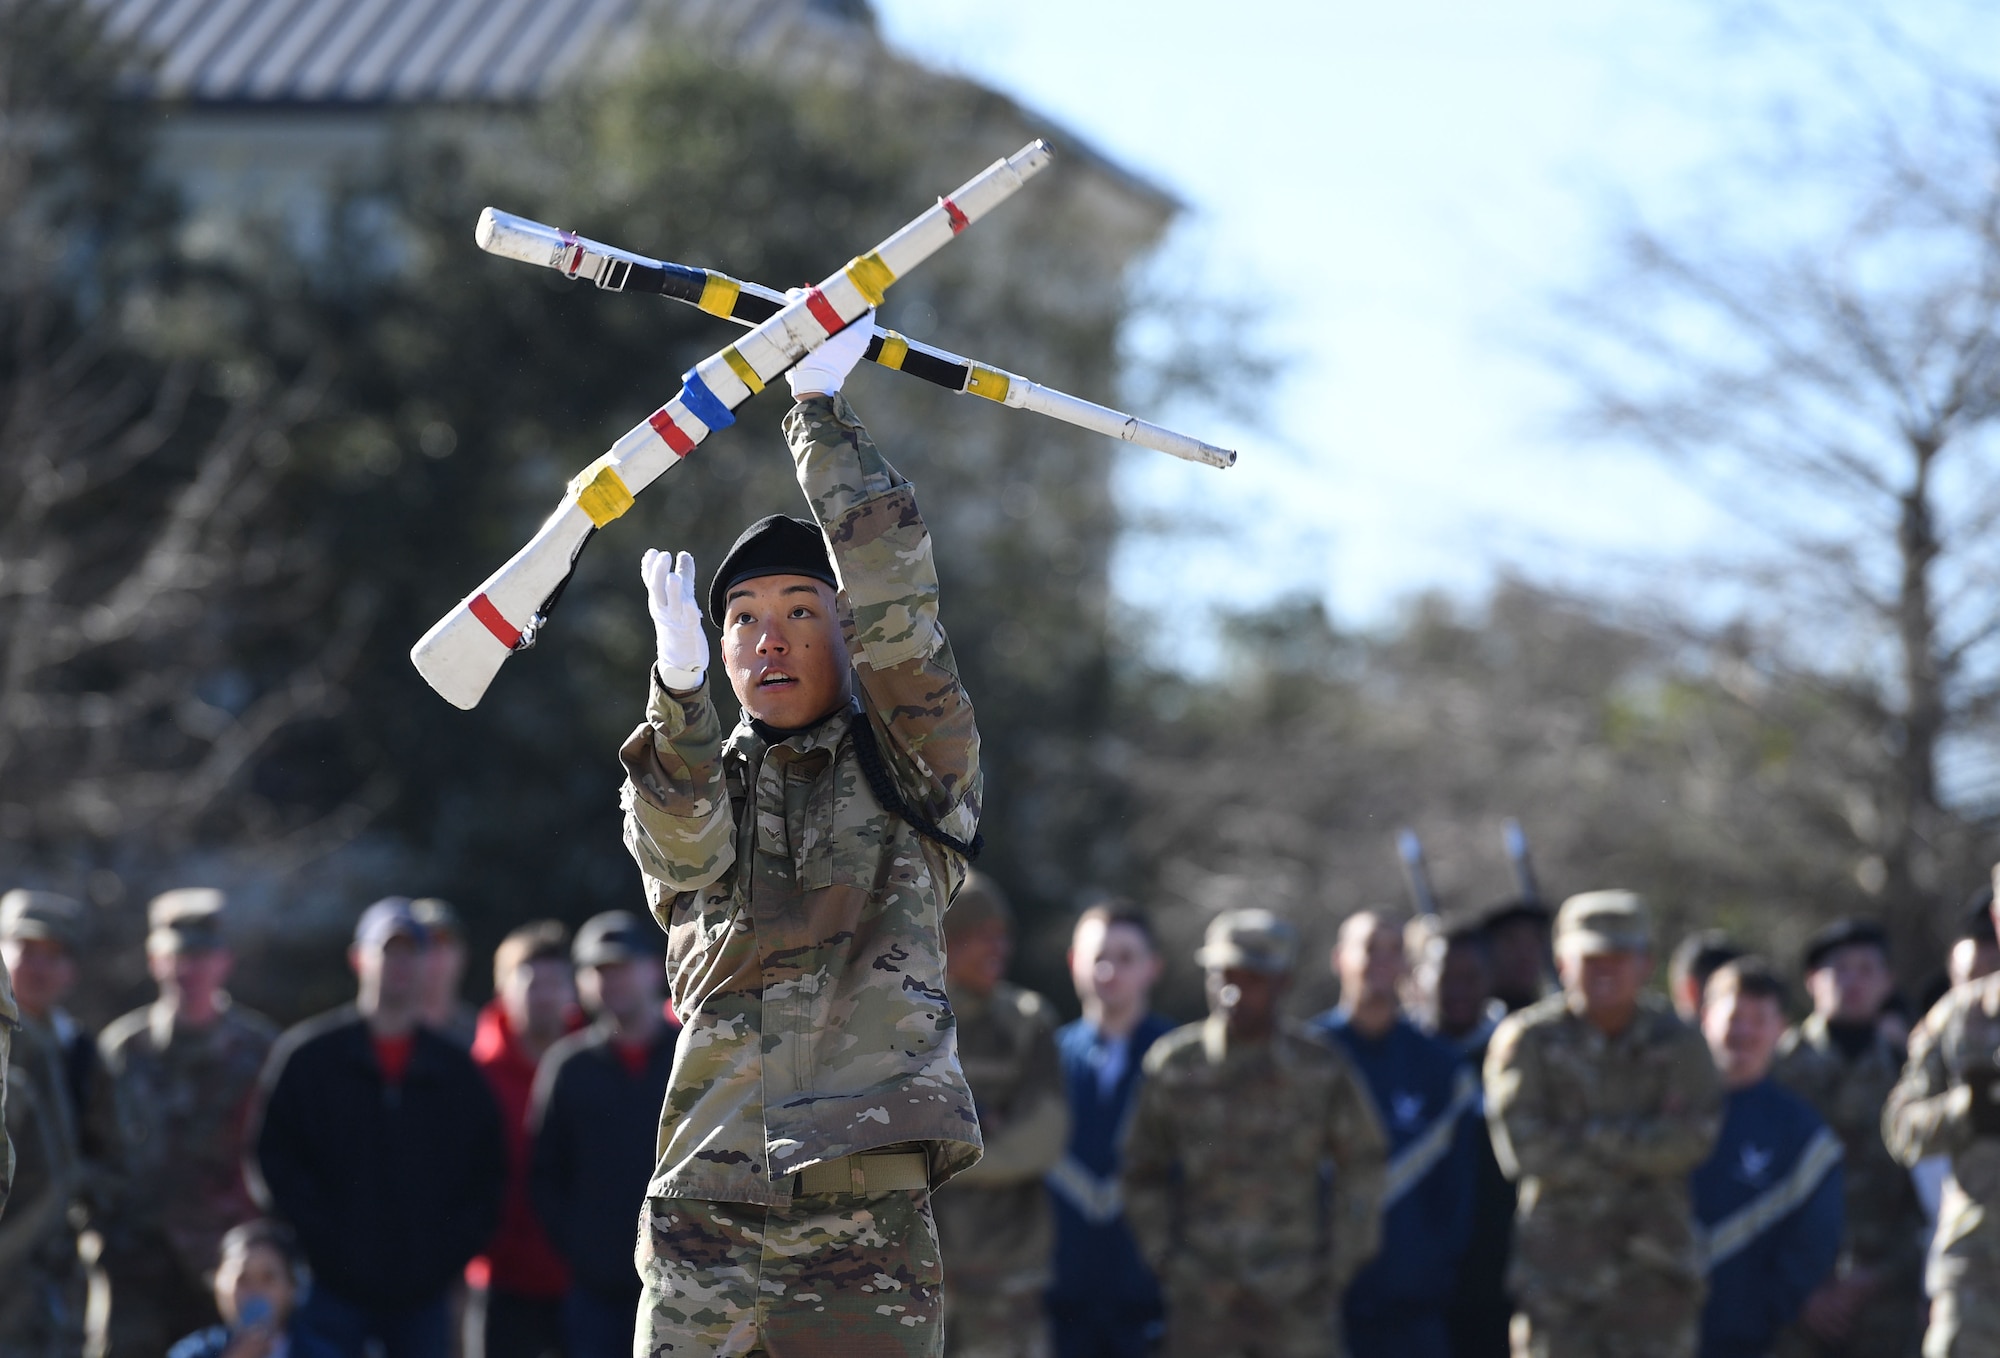 U.S. Air Force Airman 1st Class Johghun Kim, 335th Training Squadron freestyle drill team member, performs during the 81st Training Group drill down on the Levitow Training Support Facility drill pad at Keesler Air Force Base, Mississippi, Feb. 23, 2023.